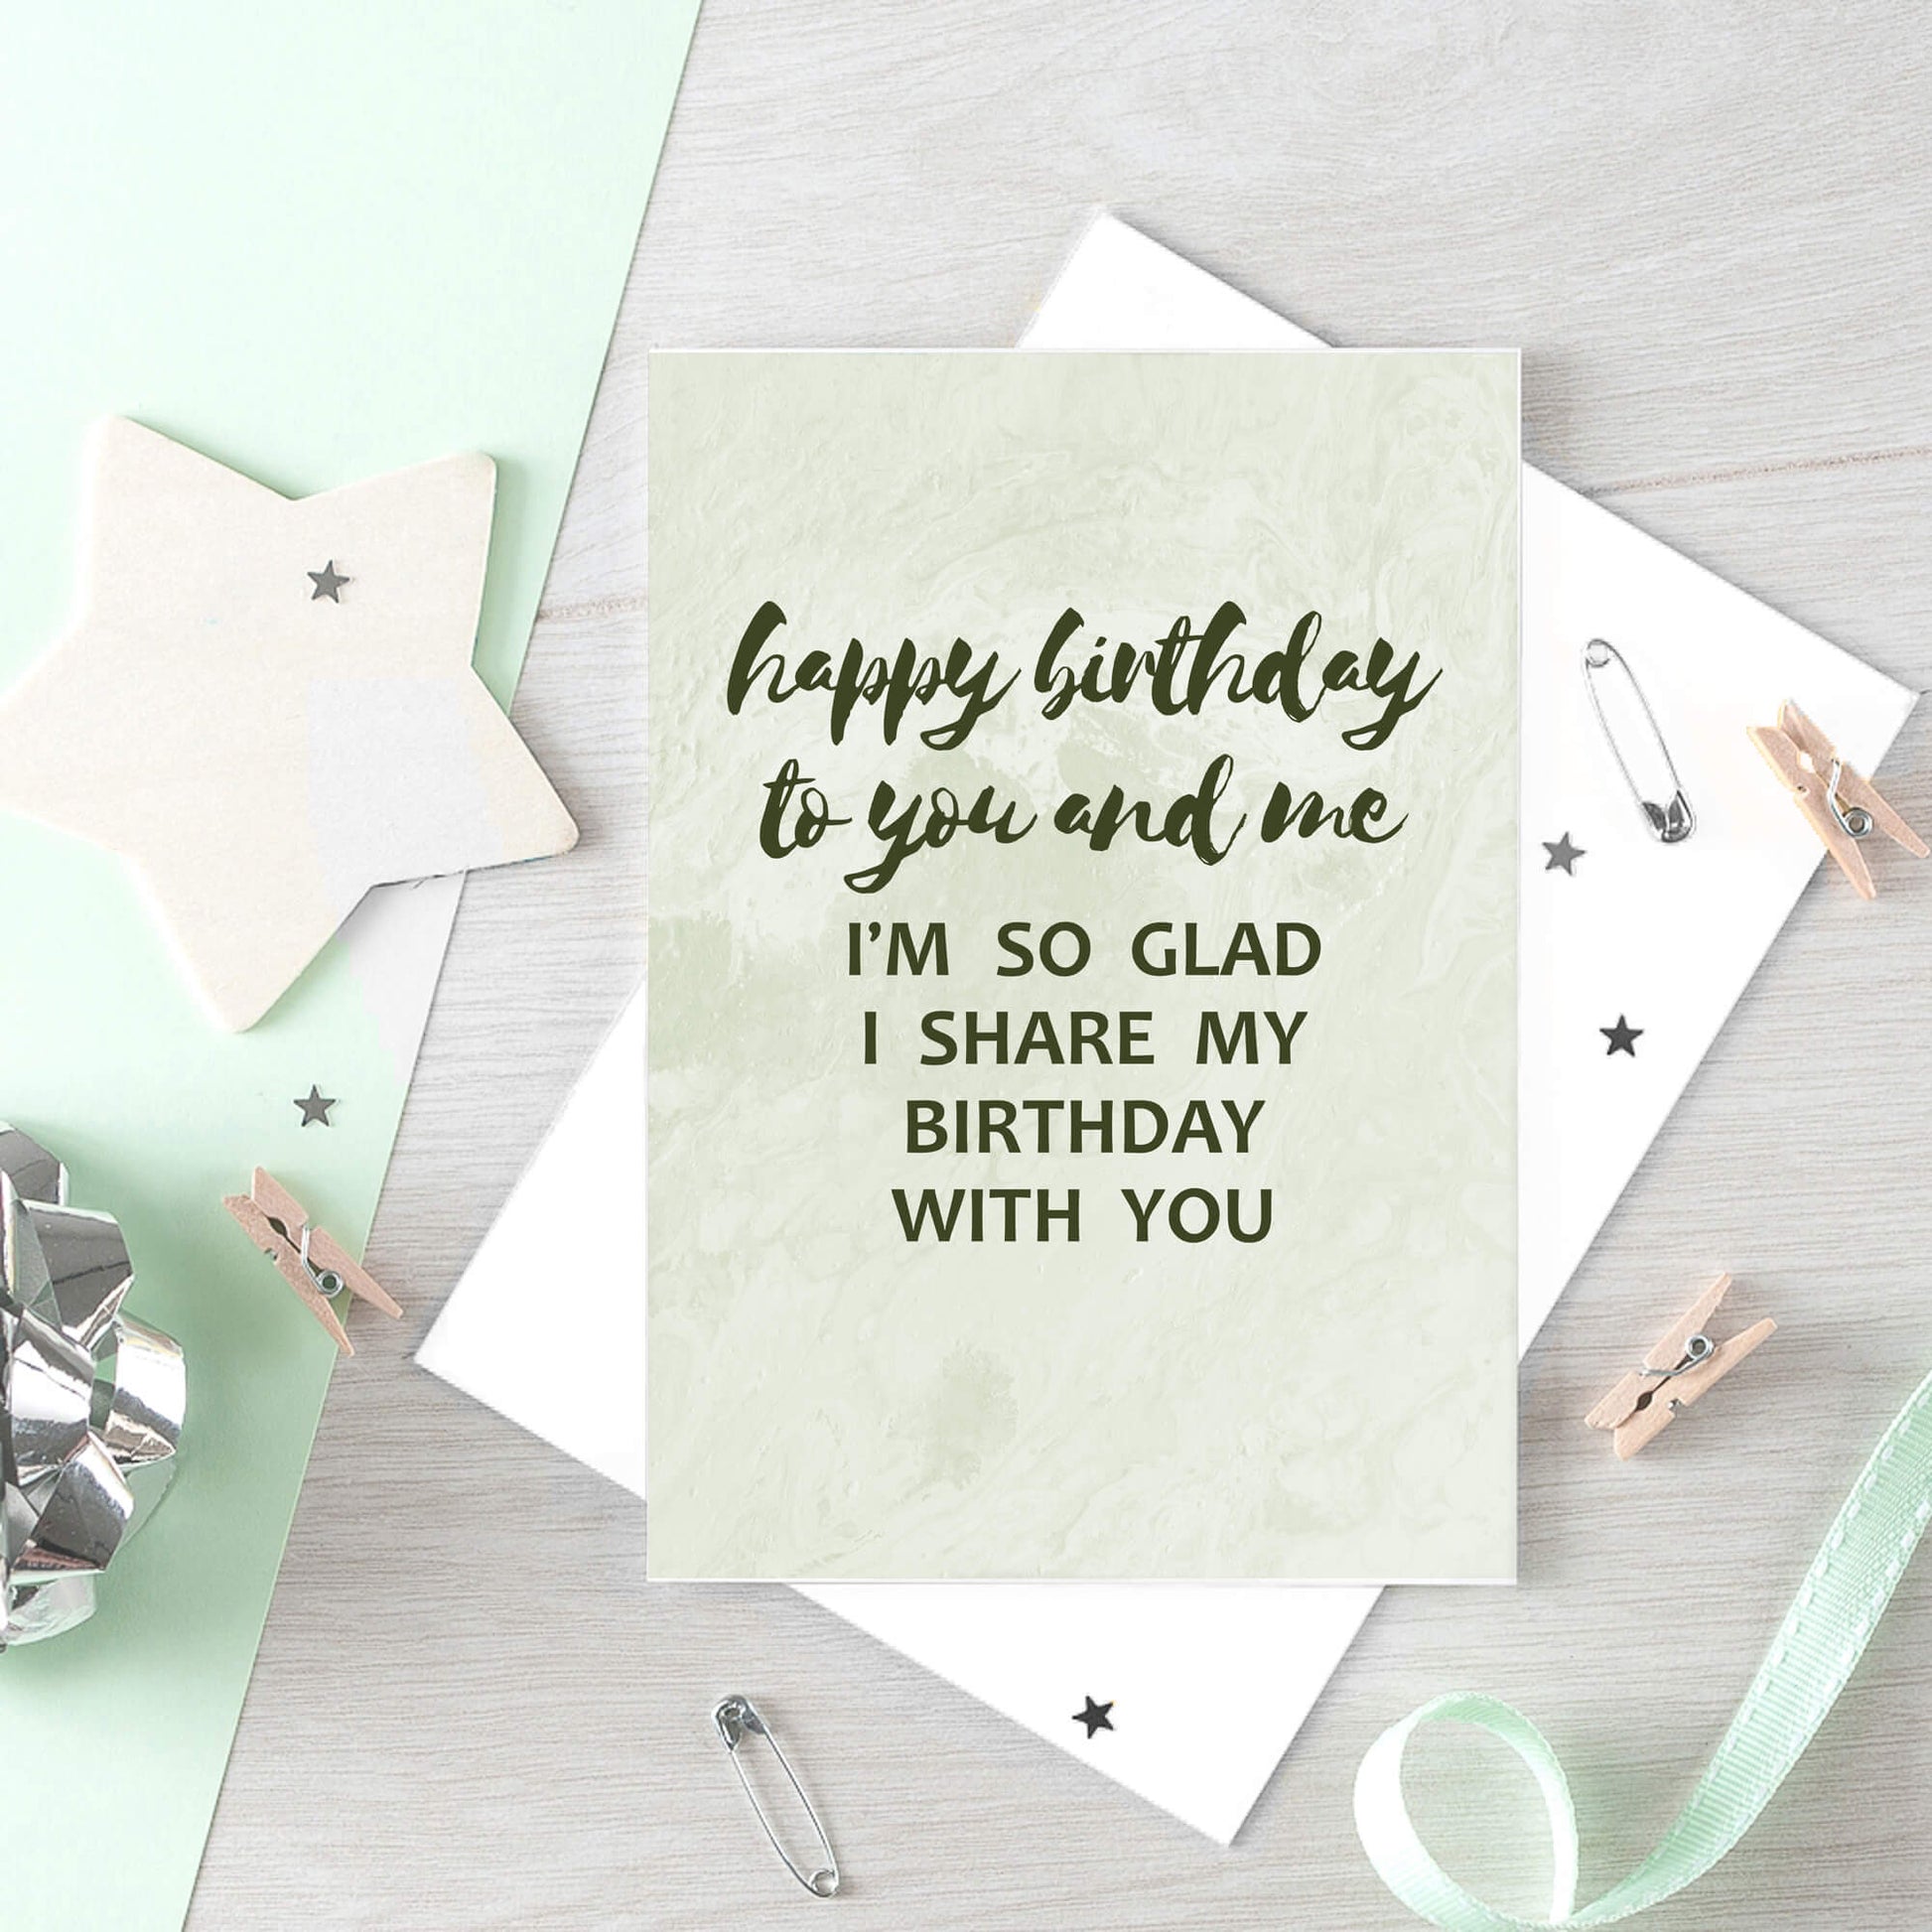 Birthday Card by SixElevenCreations. Reads Happy birthday to you and me. I'm so glad I share my birthday with you. Product Code SE3013A5